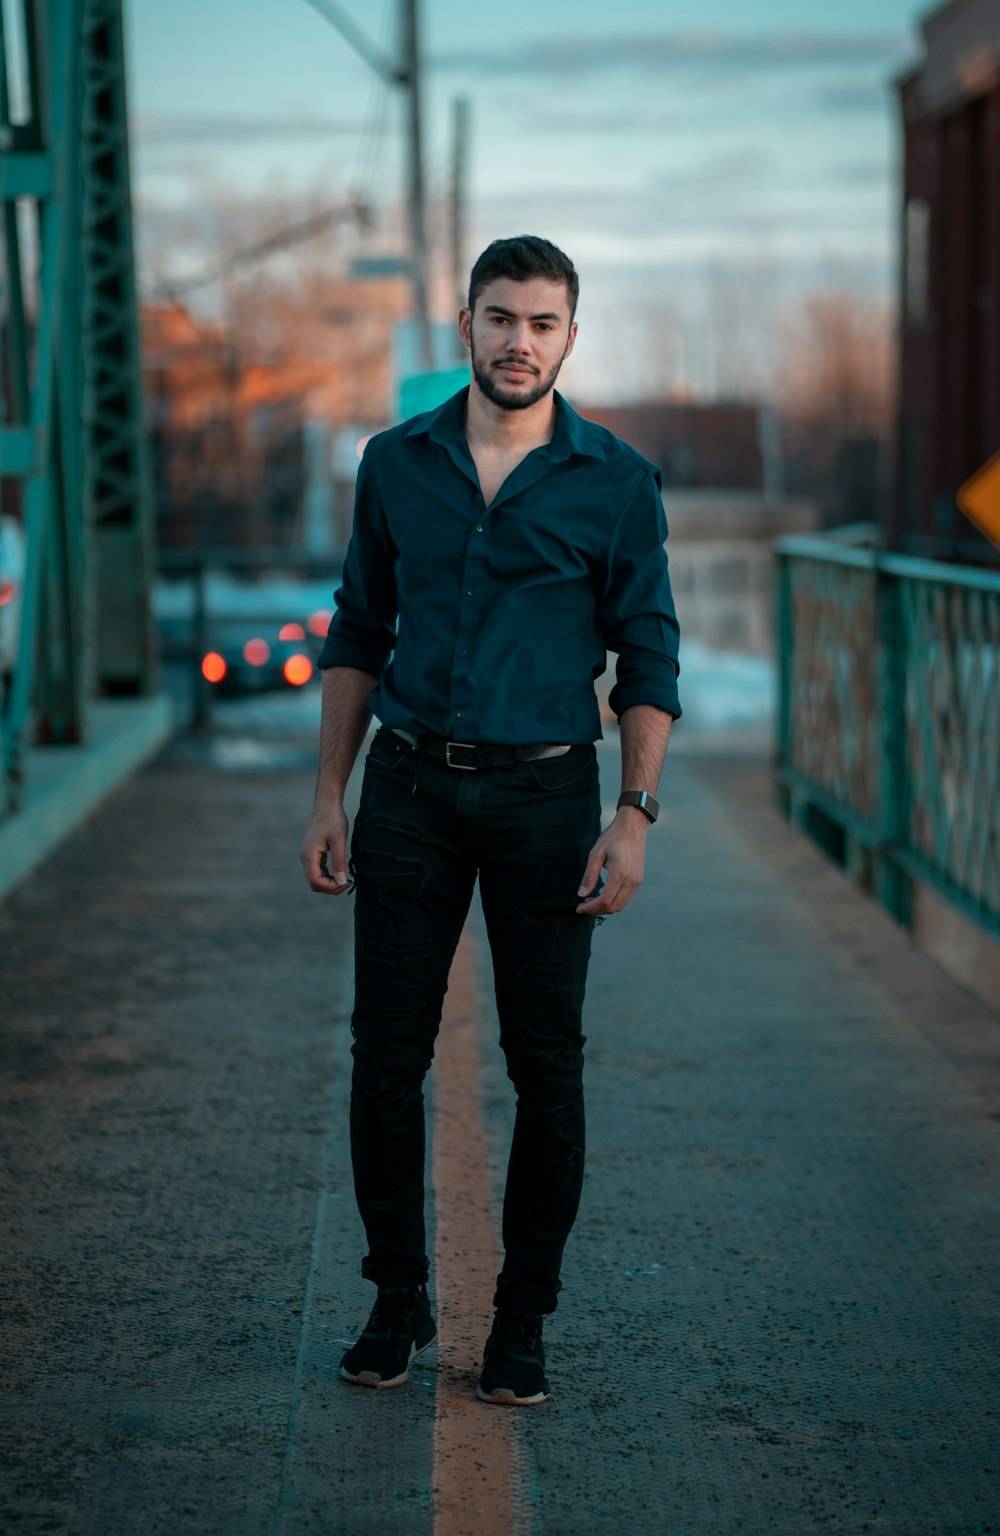 man in blue and red button up shirt standing on road during daytime